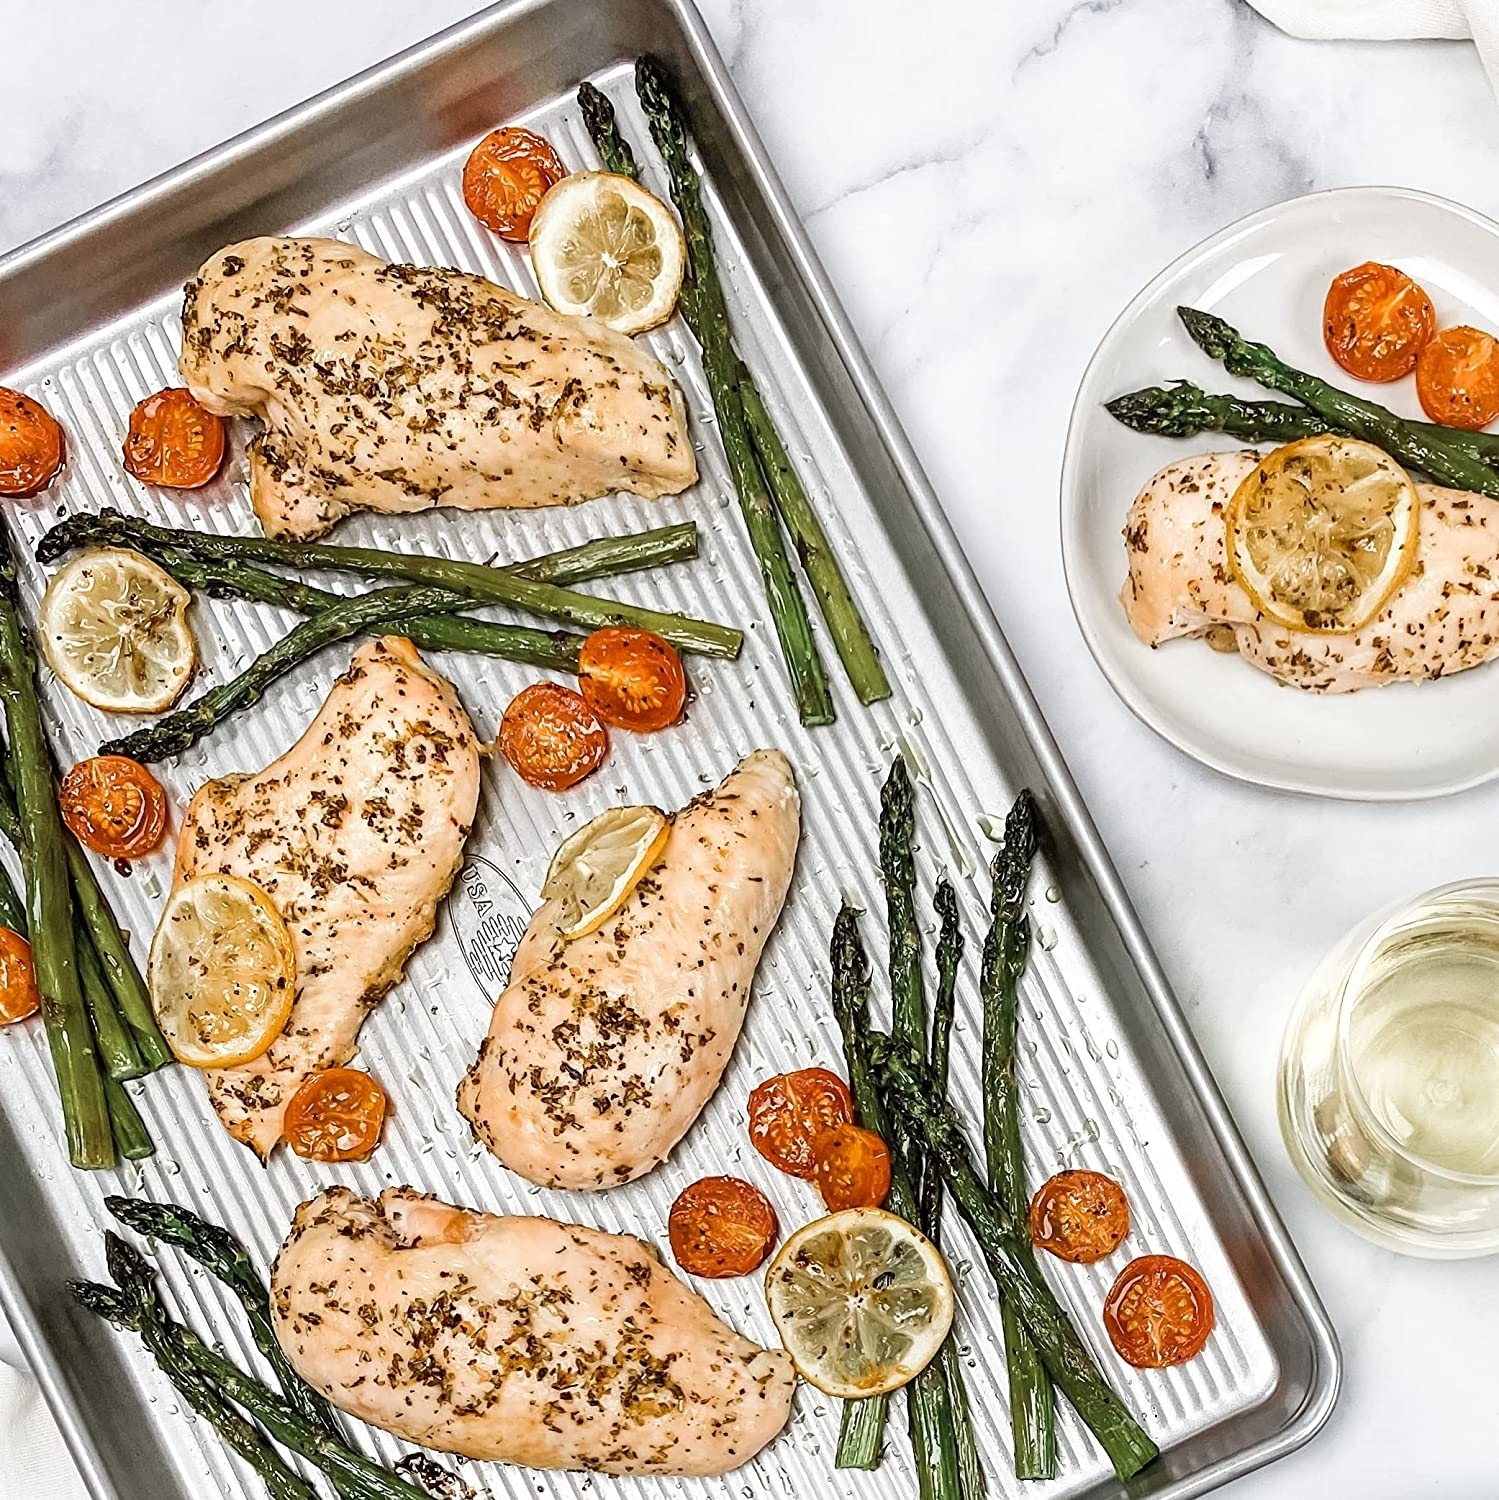 sheet pan with chicken and veggies on it